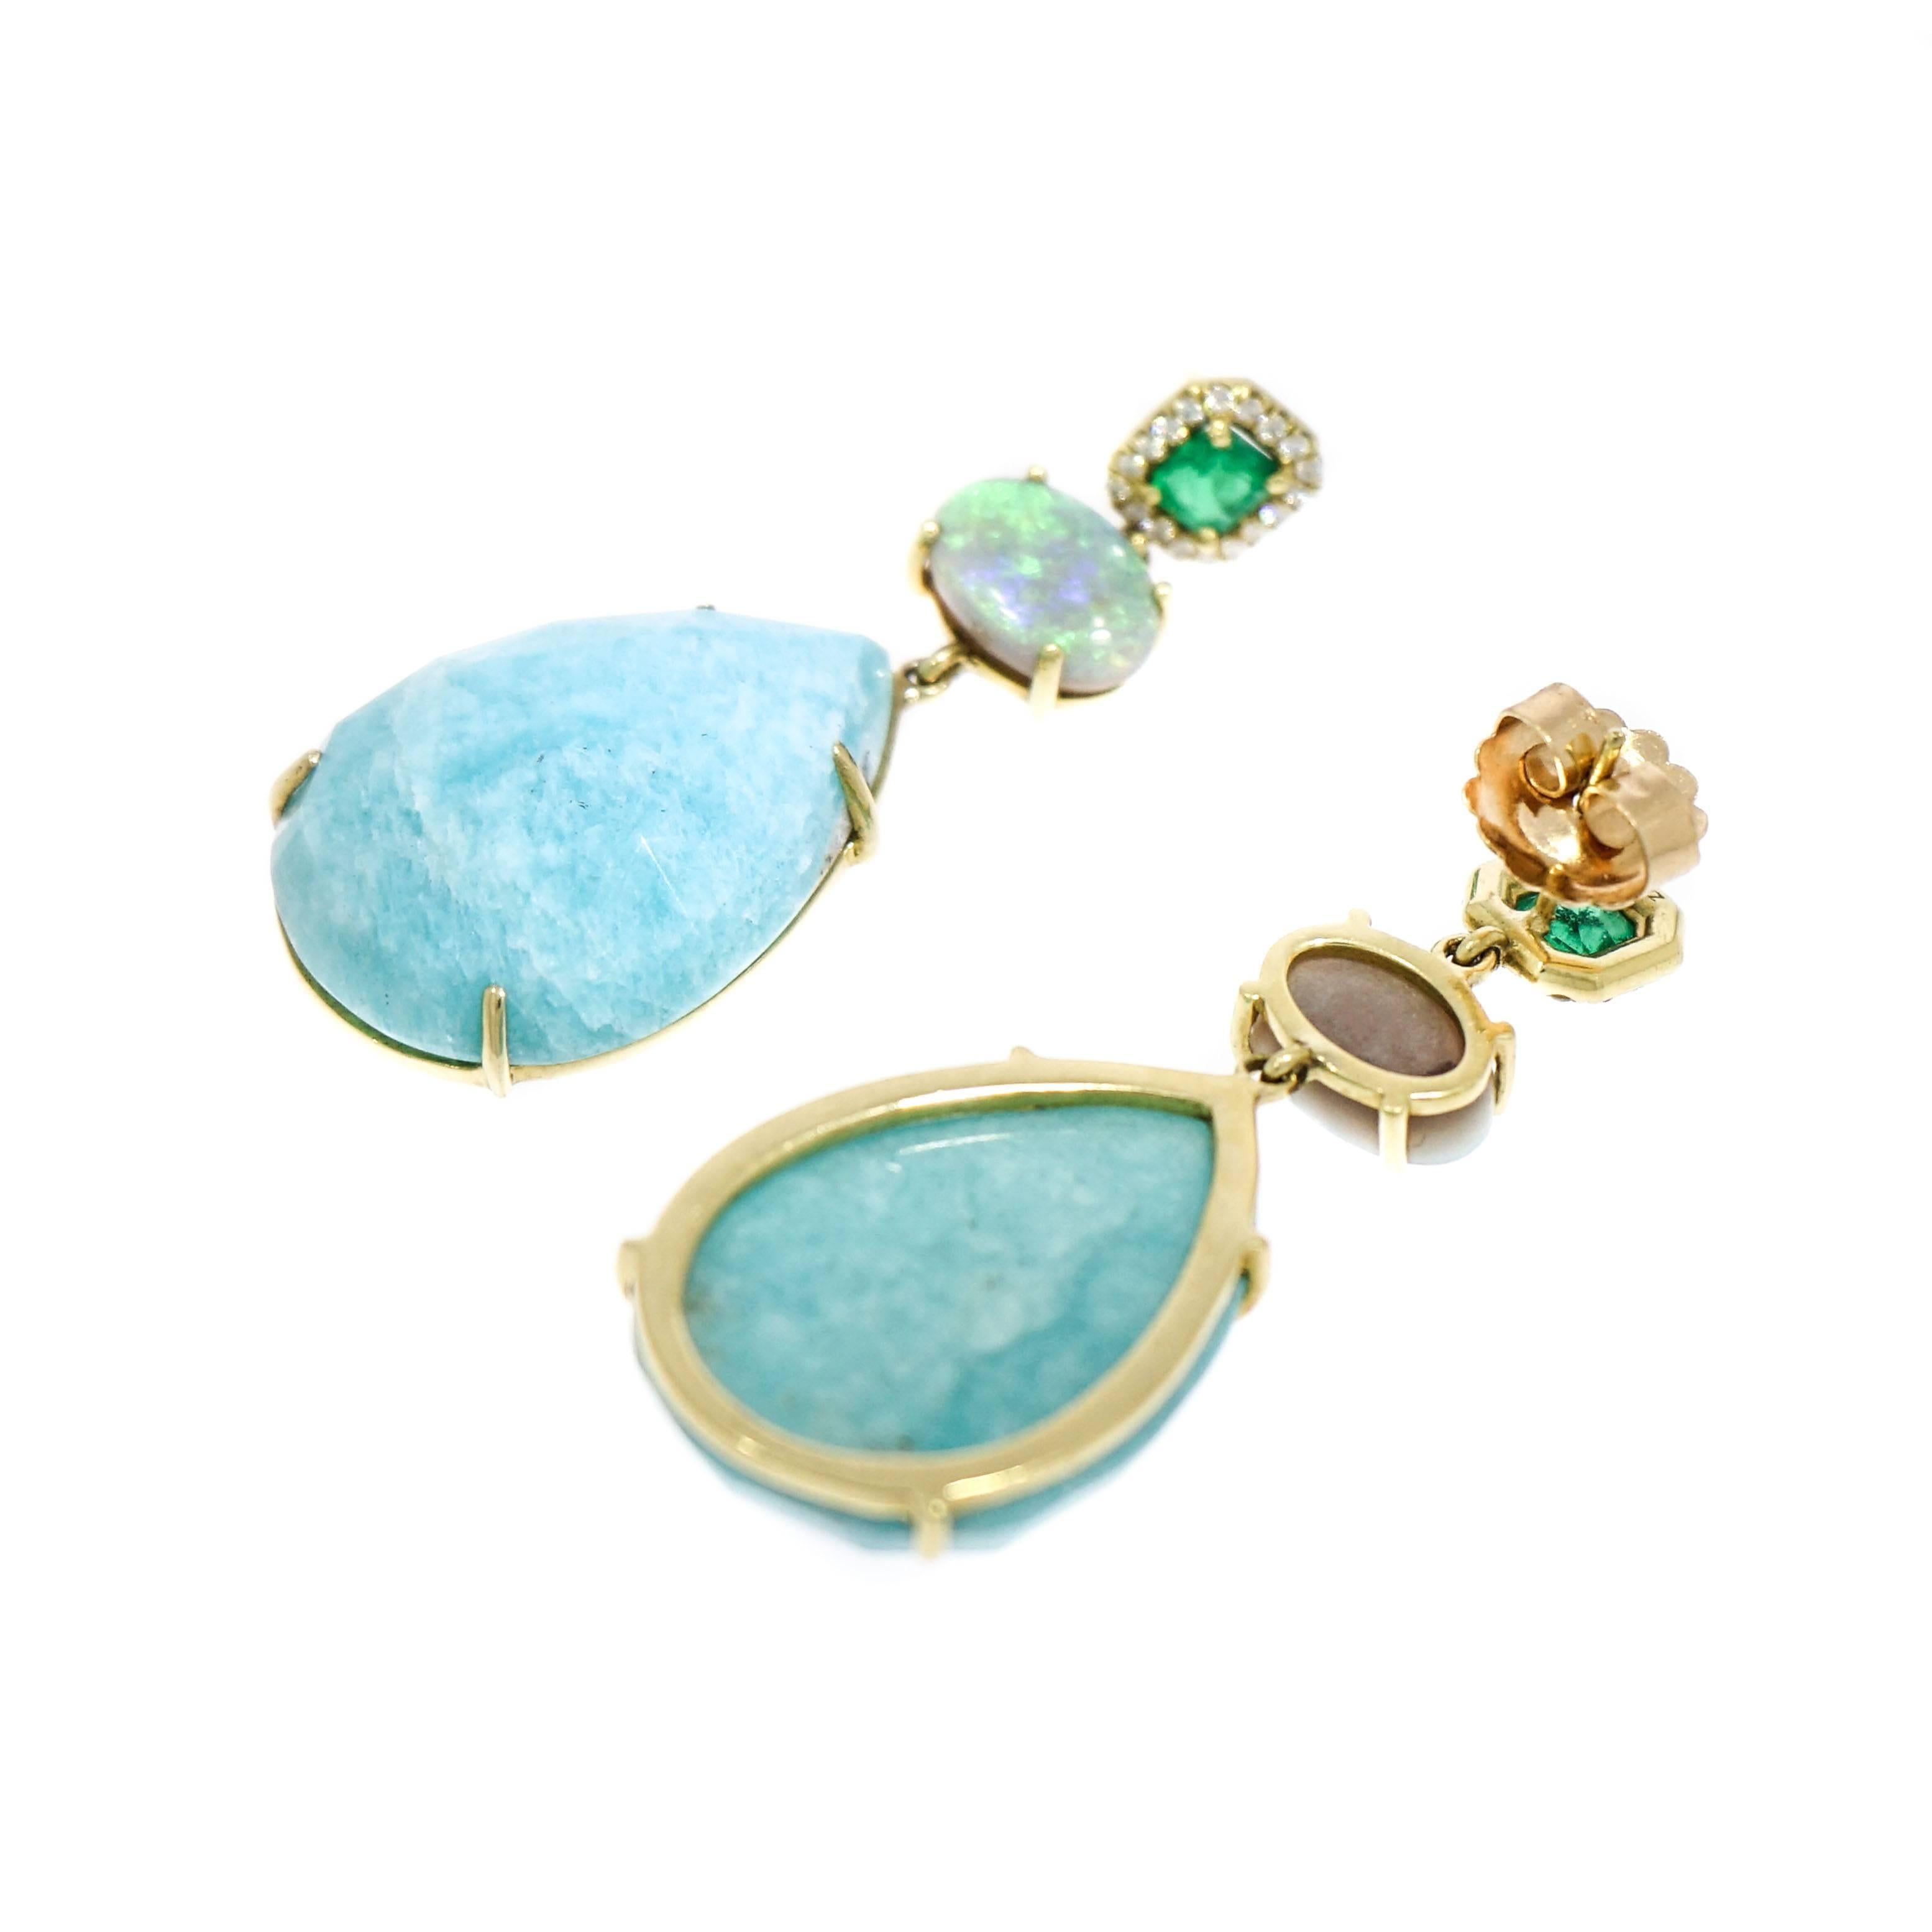 Pastel probably isn't the word that comes to mind when you think of fine jewelry, but the delicate tone of Amazonite is unique. Both for Spring, Summer or anytime you please, this precious pair of earrings will rock!!
Designed in NYC by Lauren K,